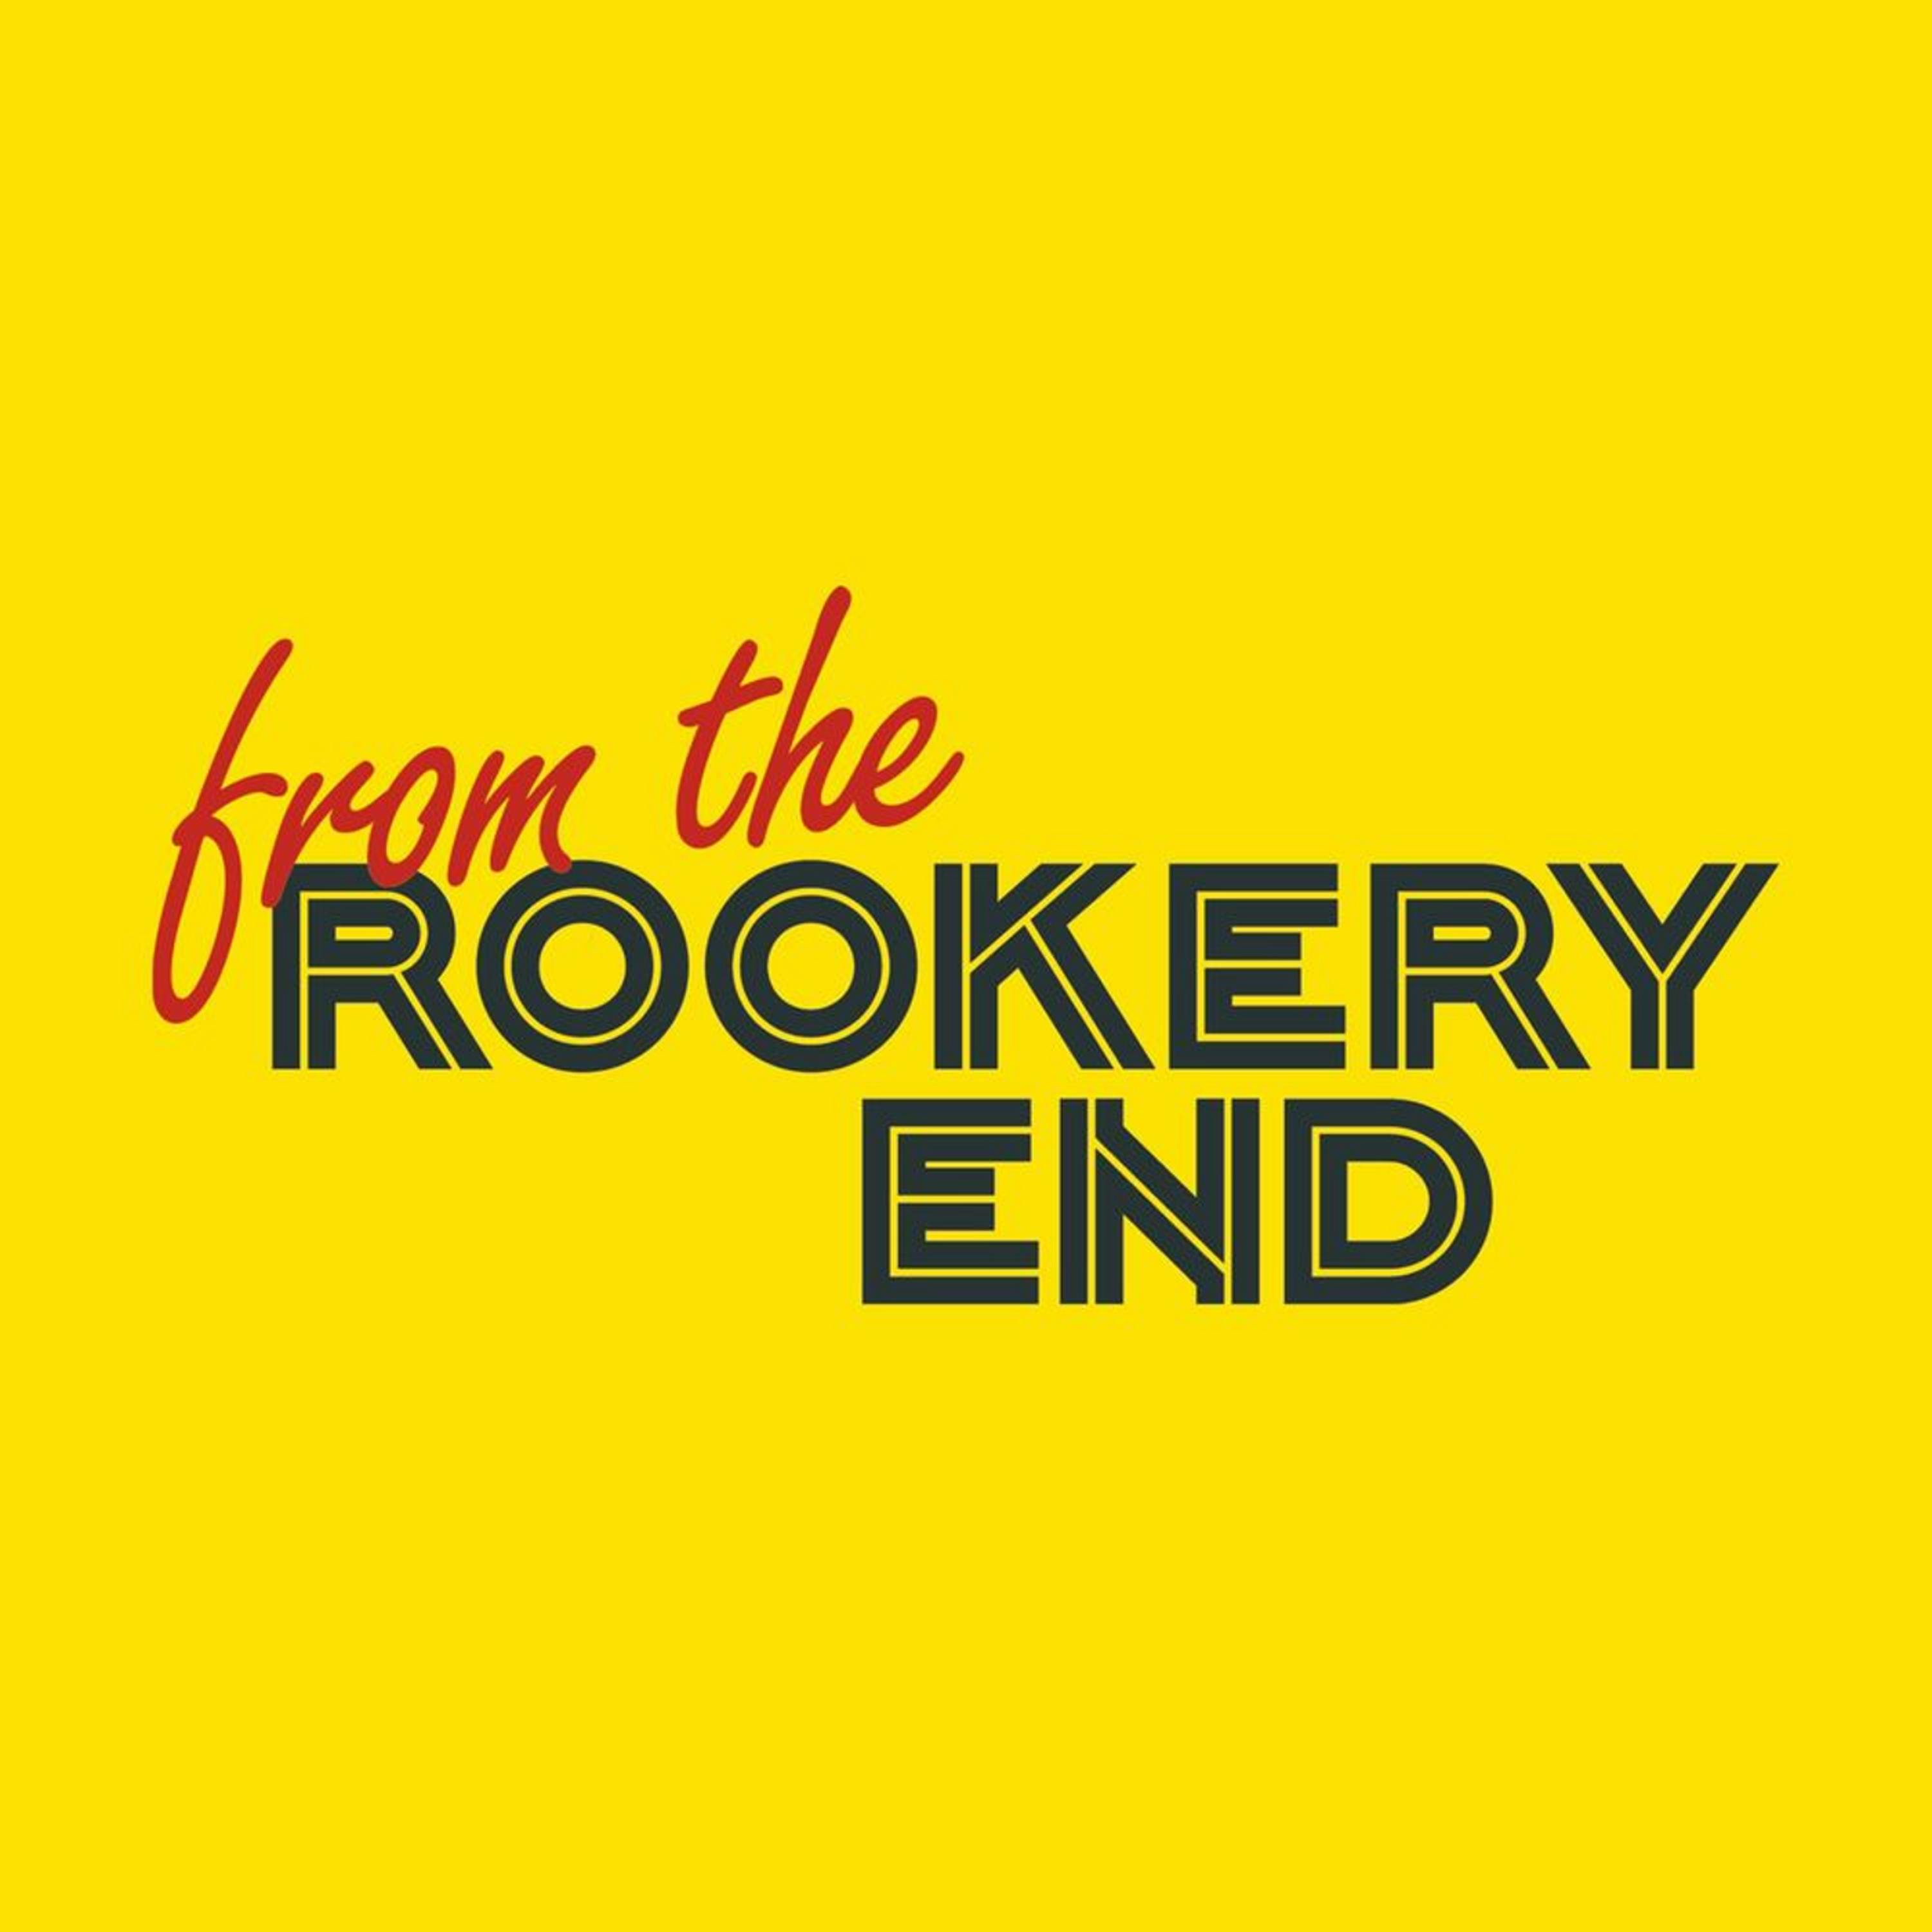 From The Rookery End - A show about Watford FC